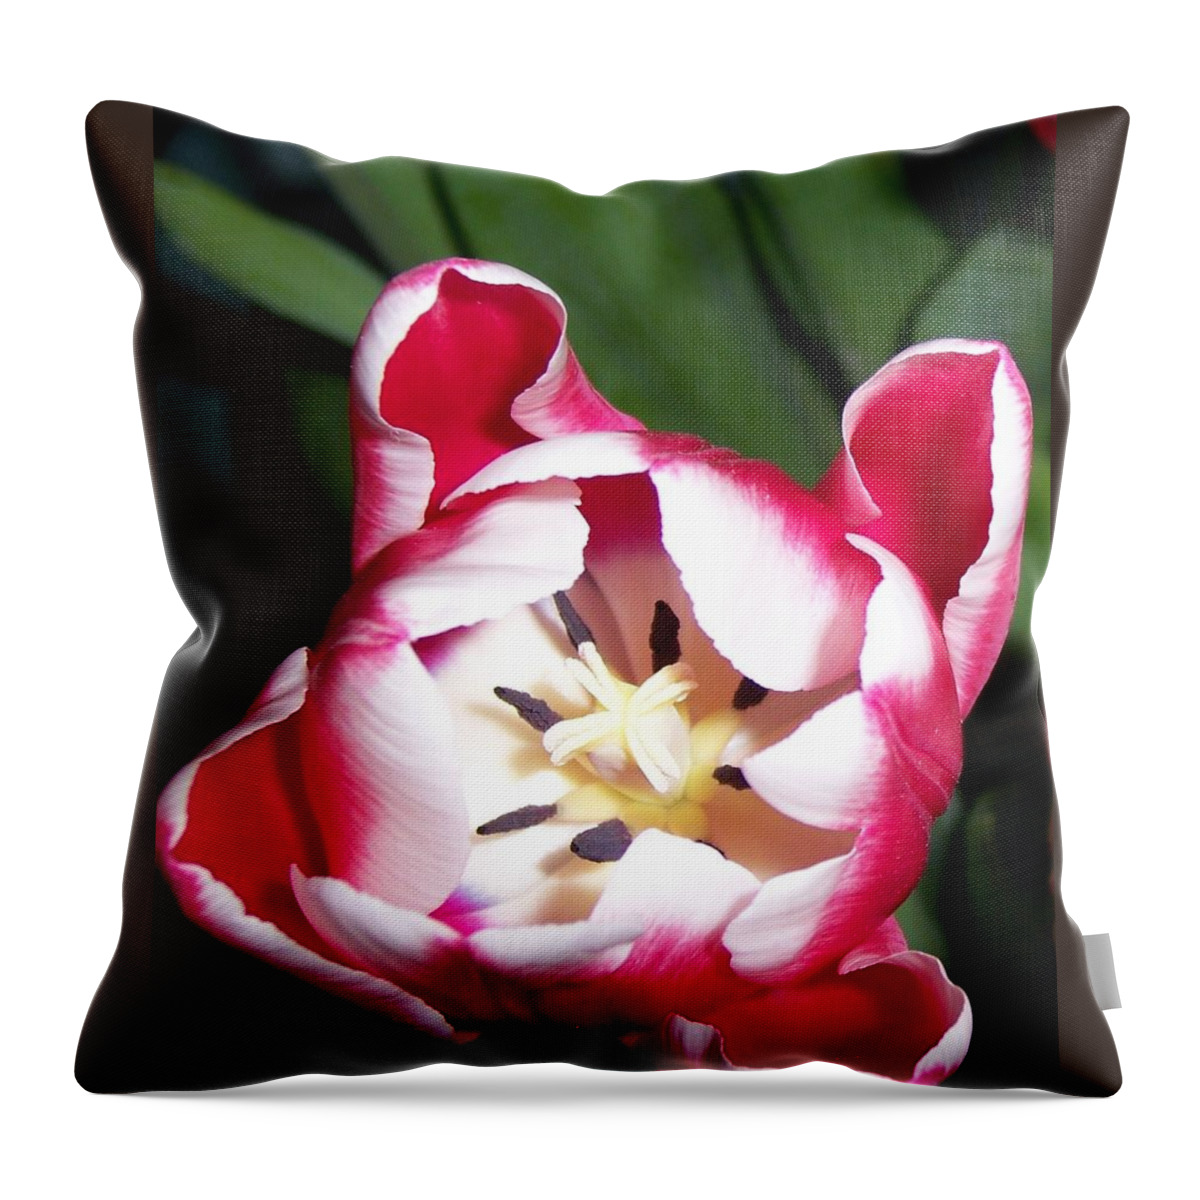 Red Throw Pillow featuring the photograph Red and White Tulip by Nora Boghossian